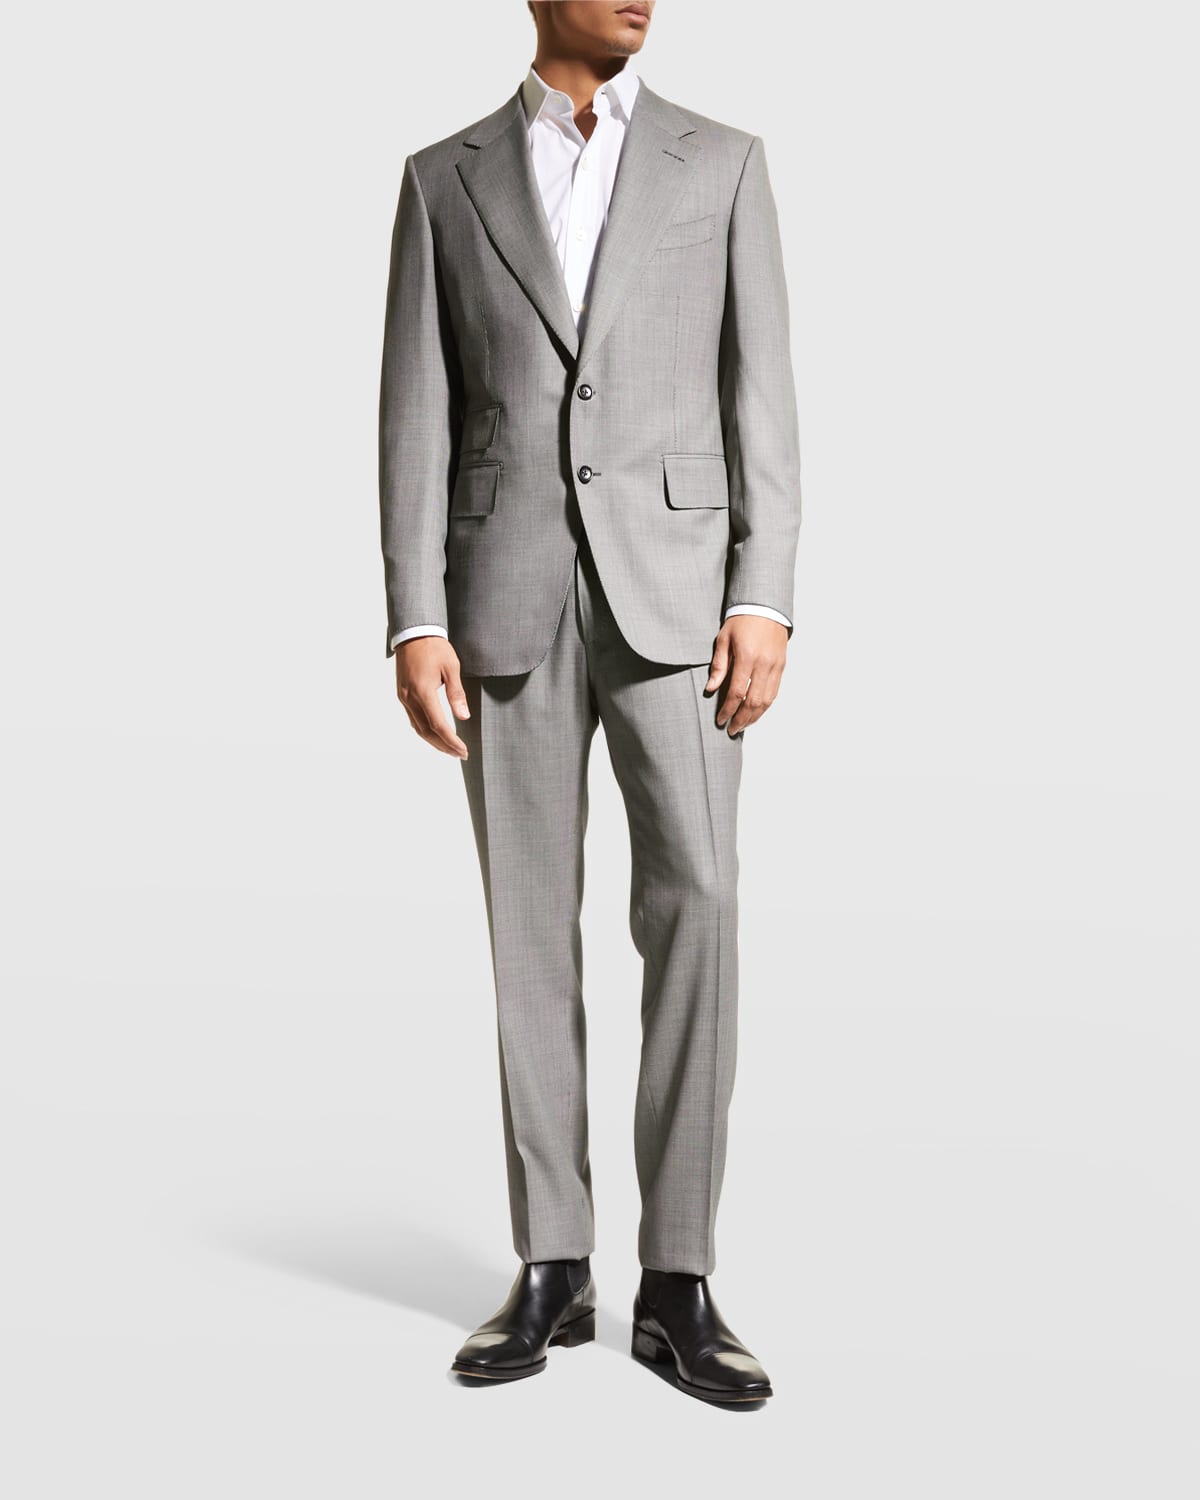 Tom Ford Wool Two-piece Suit | Neiman Marcus